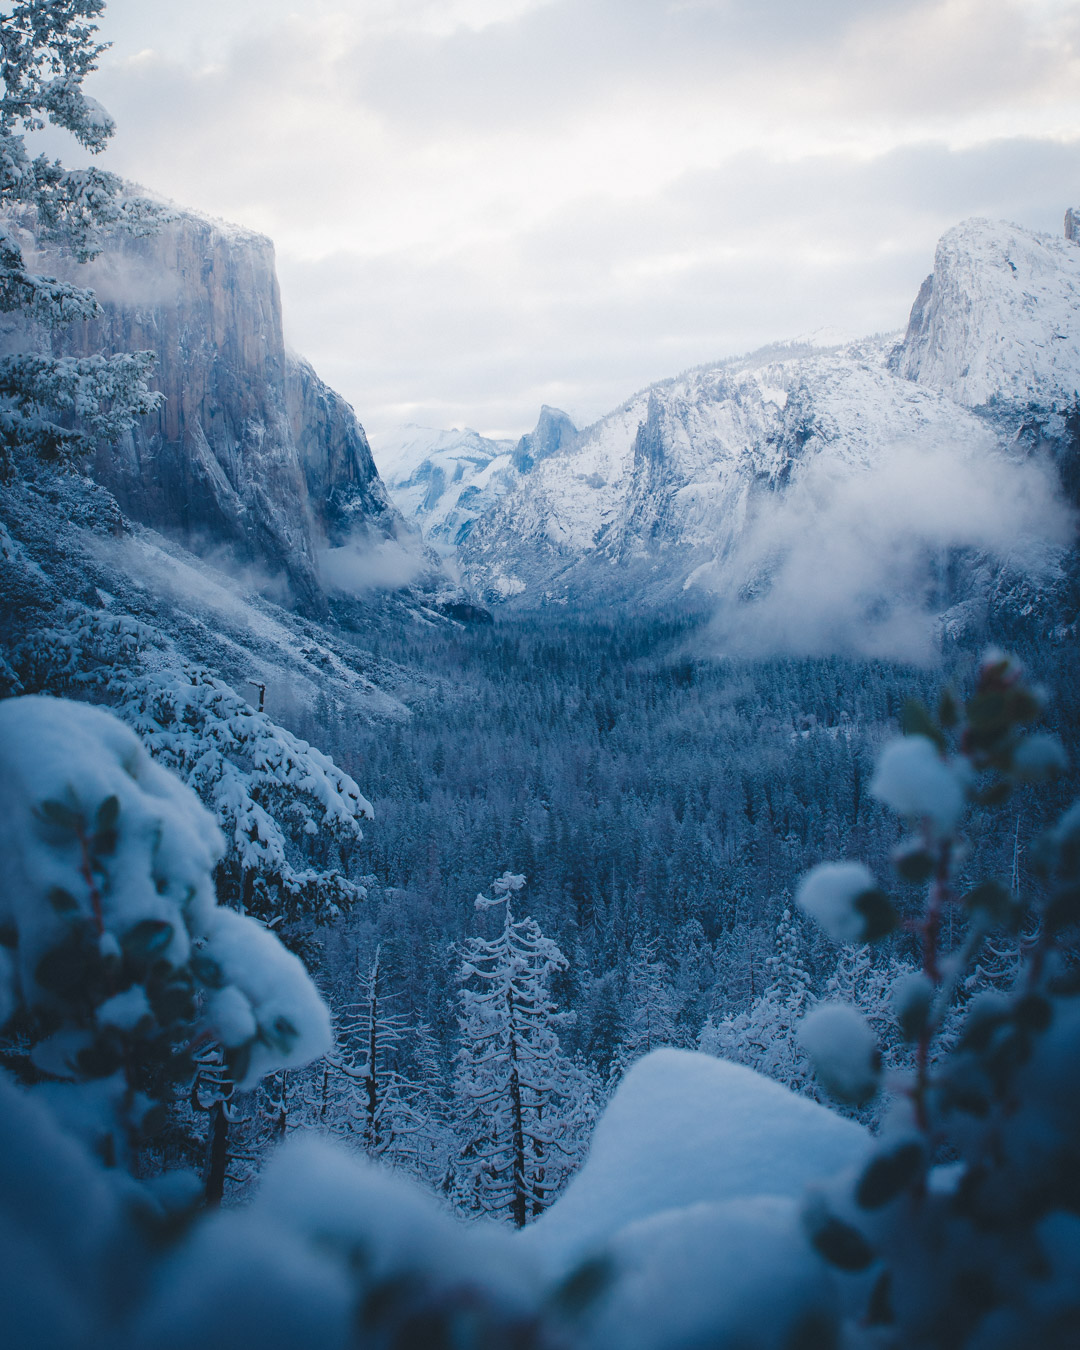 snowy winter day at tunnel view yosemite national park